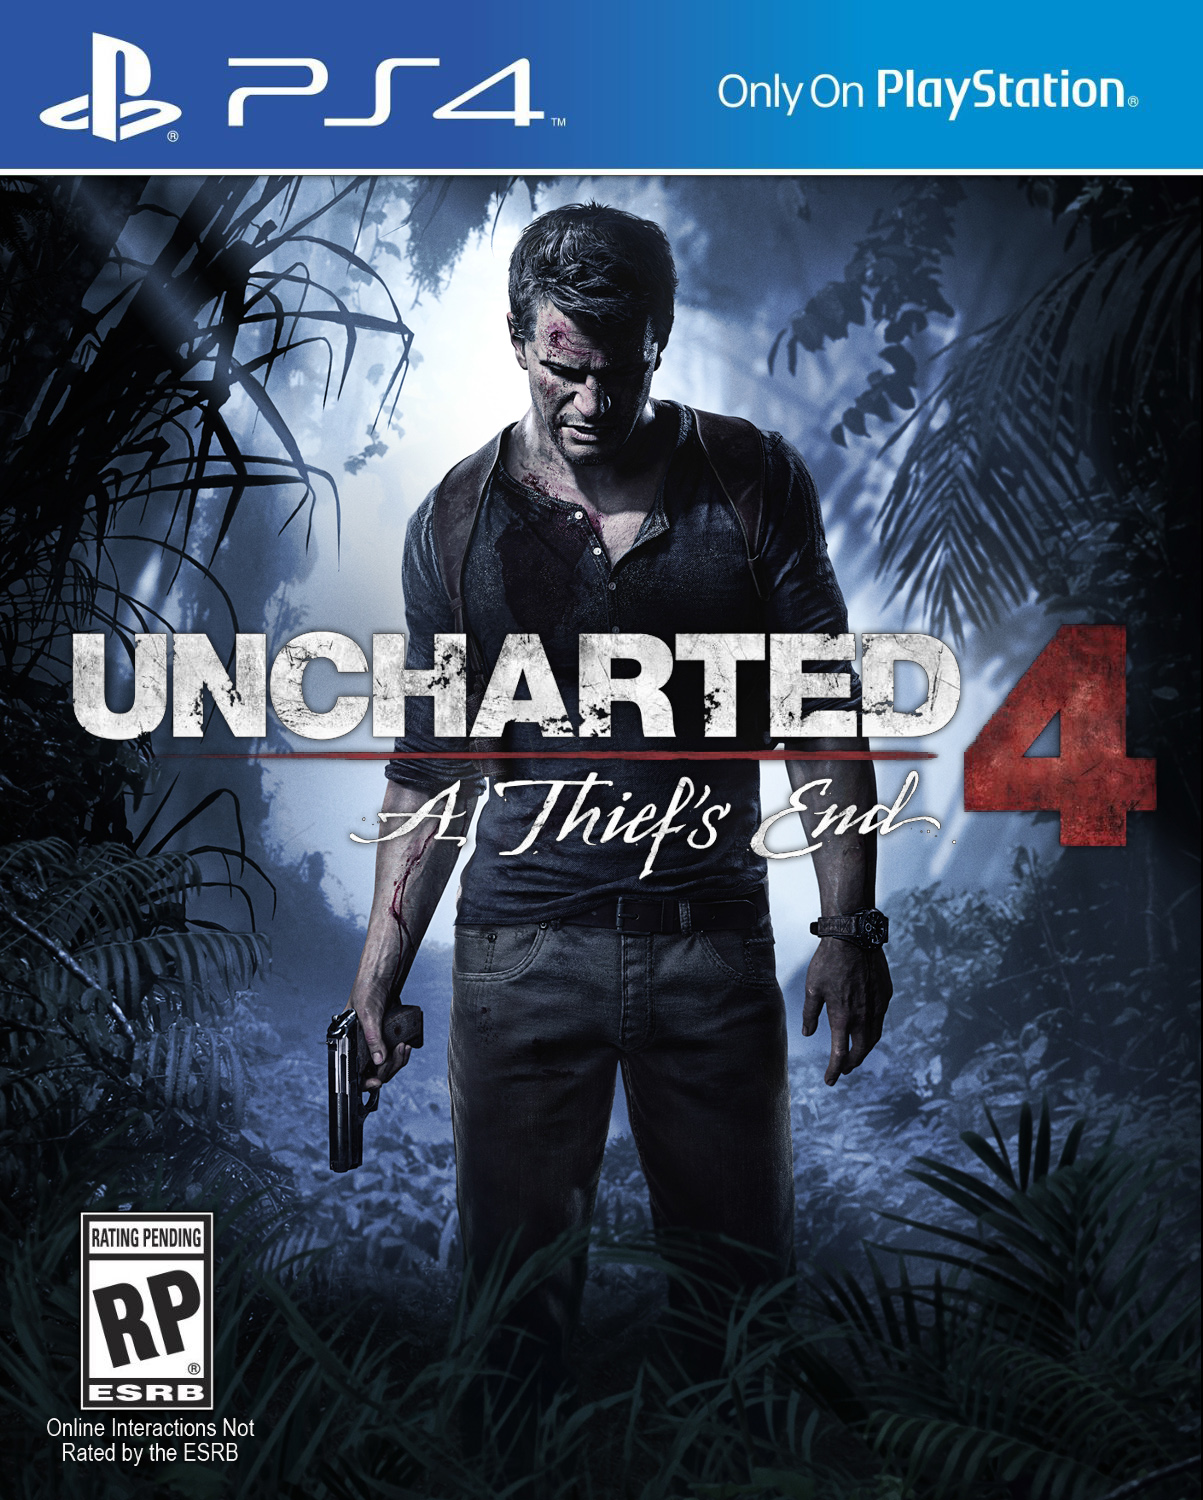 Uncharted 4: A Thief’s End / Uncharted 4: Путь вора [PS4 Exclusive] 5.05 / 6.72 / 7.02 [EUR] (2016) [Русский] (v1.33)